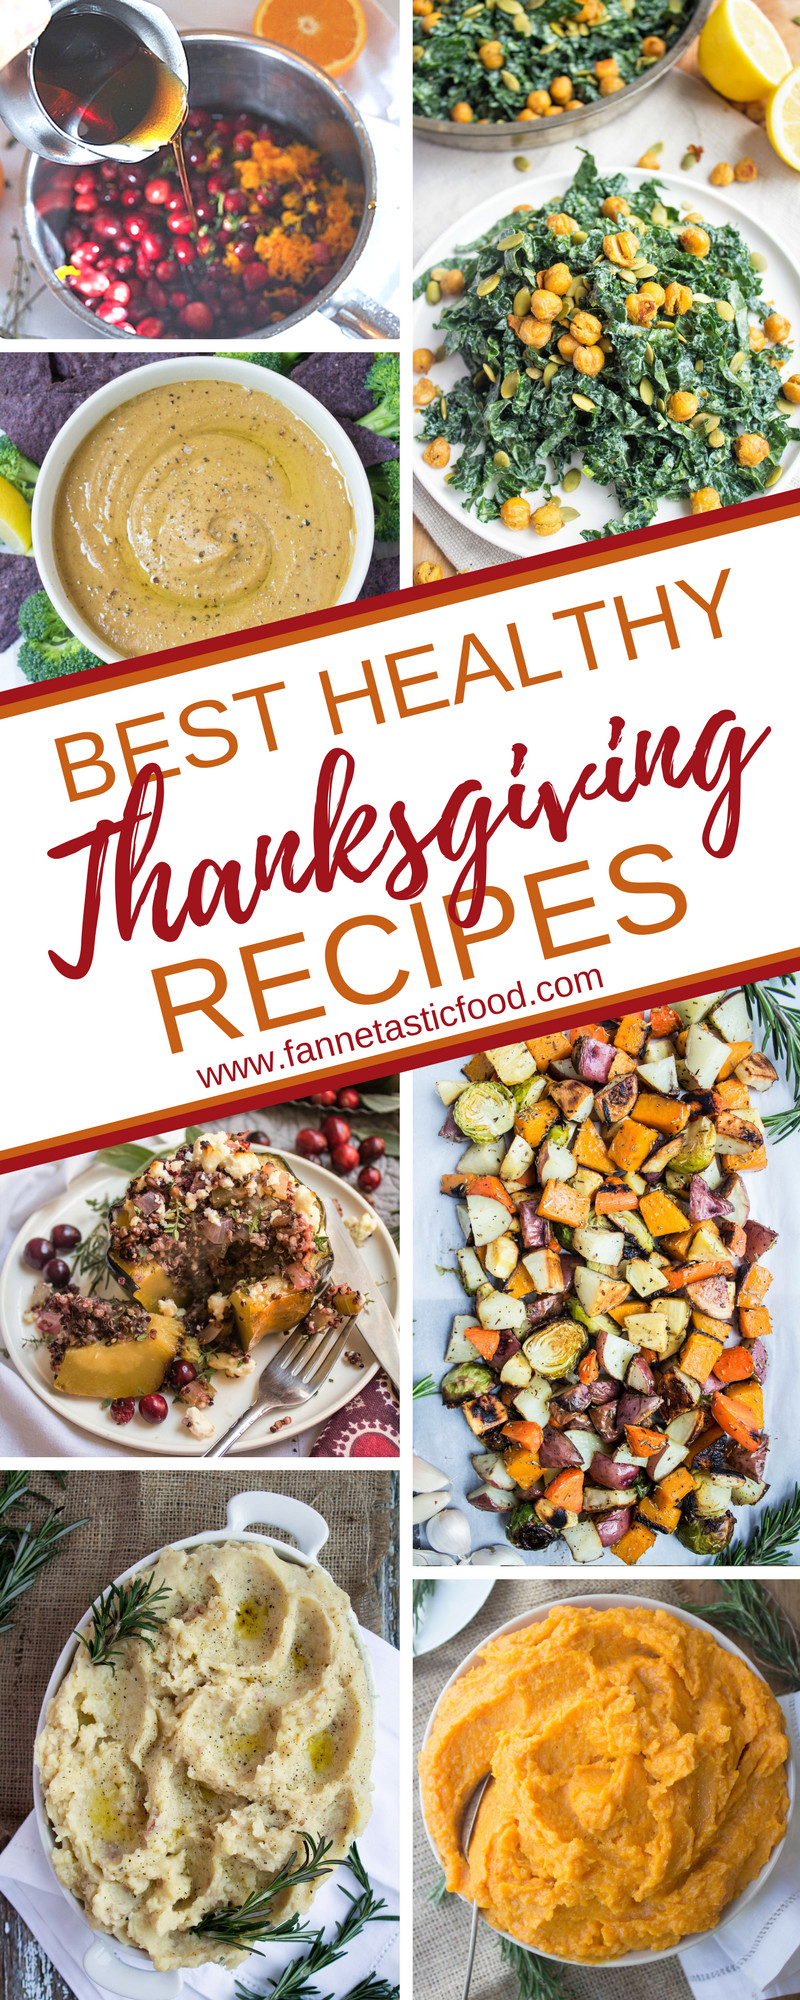 Healthy Thanksgiving Food
 Best Healthy Thanksgiving Recipes